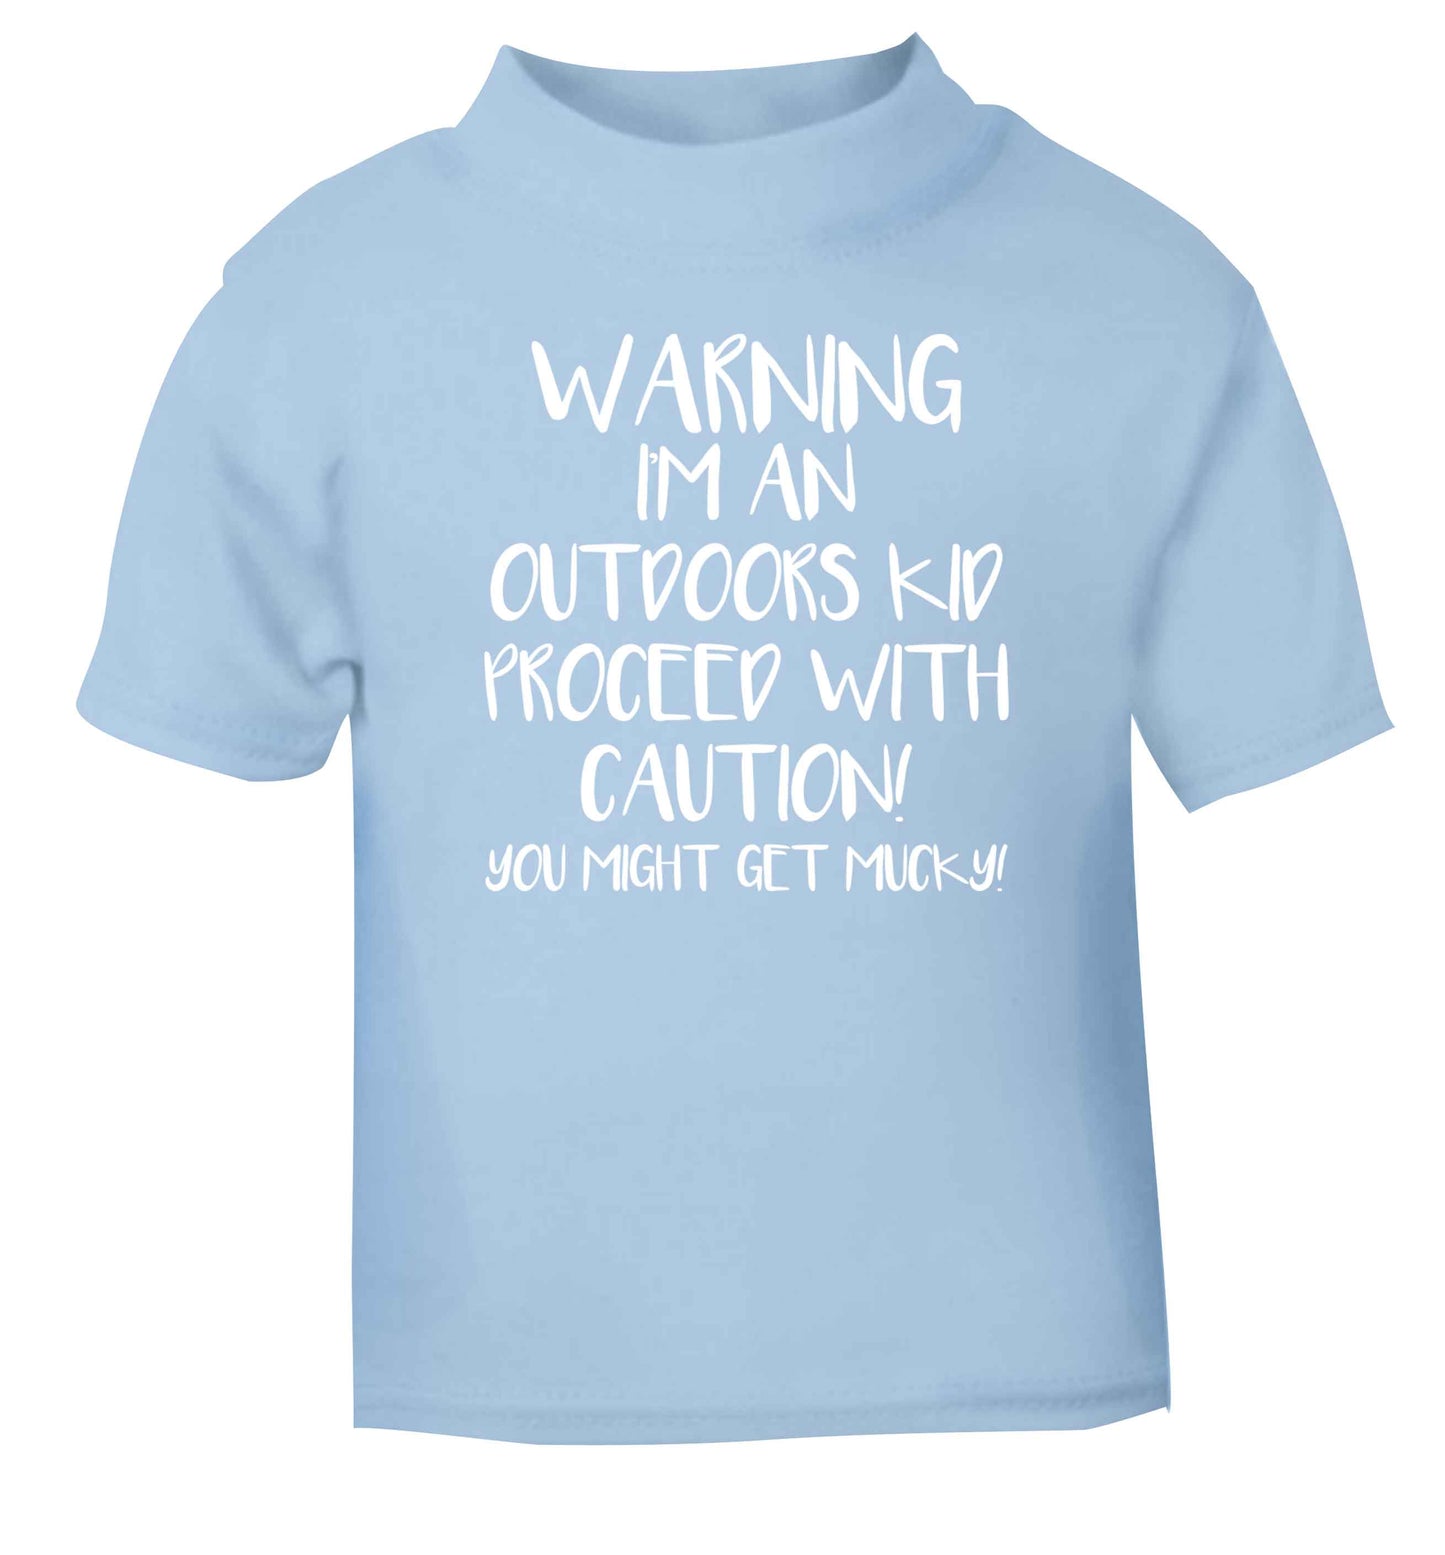 Warning I'm an outdoors kid! Proceed with caution you might get mucky light blue Baby Toddler Tshirt 2 Years